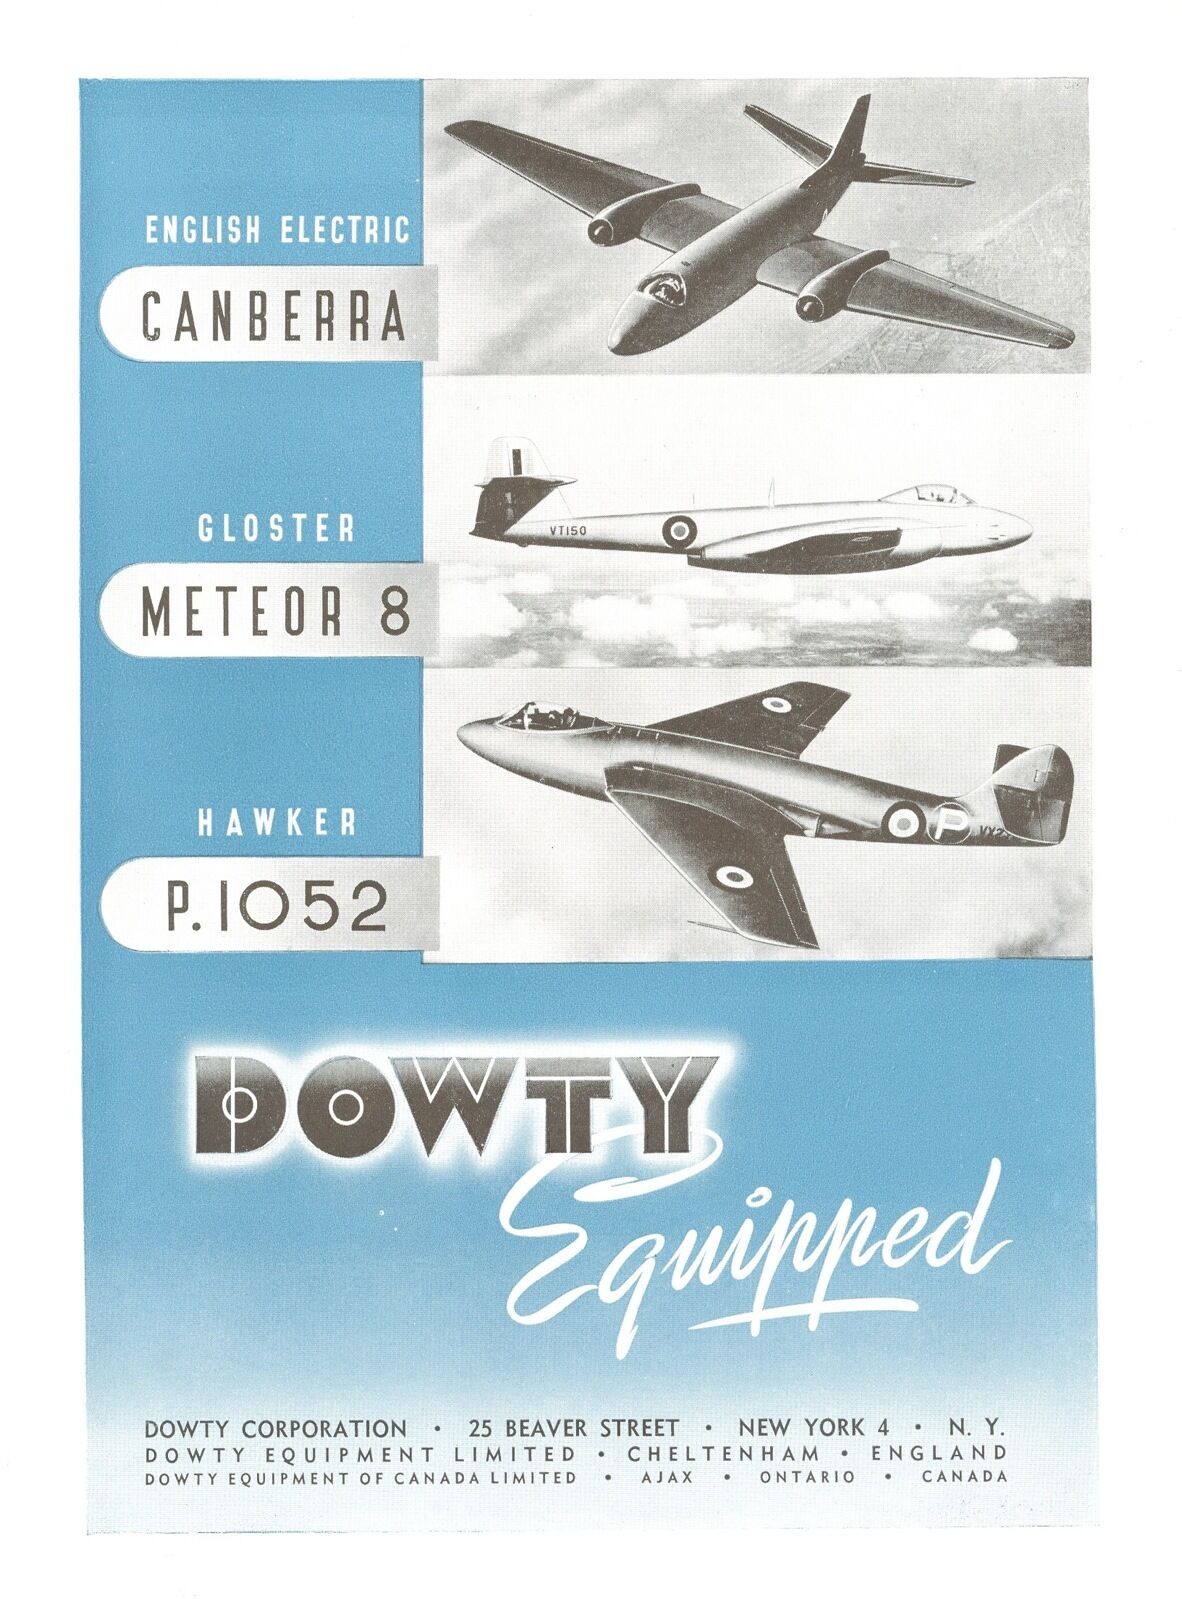 1950 Dowty Equipment Ad English Electric Canberra Gloster Meteor 8 Hawker P-1052